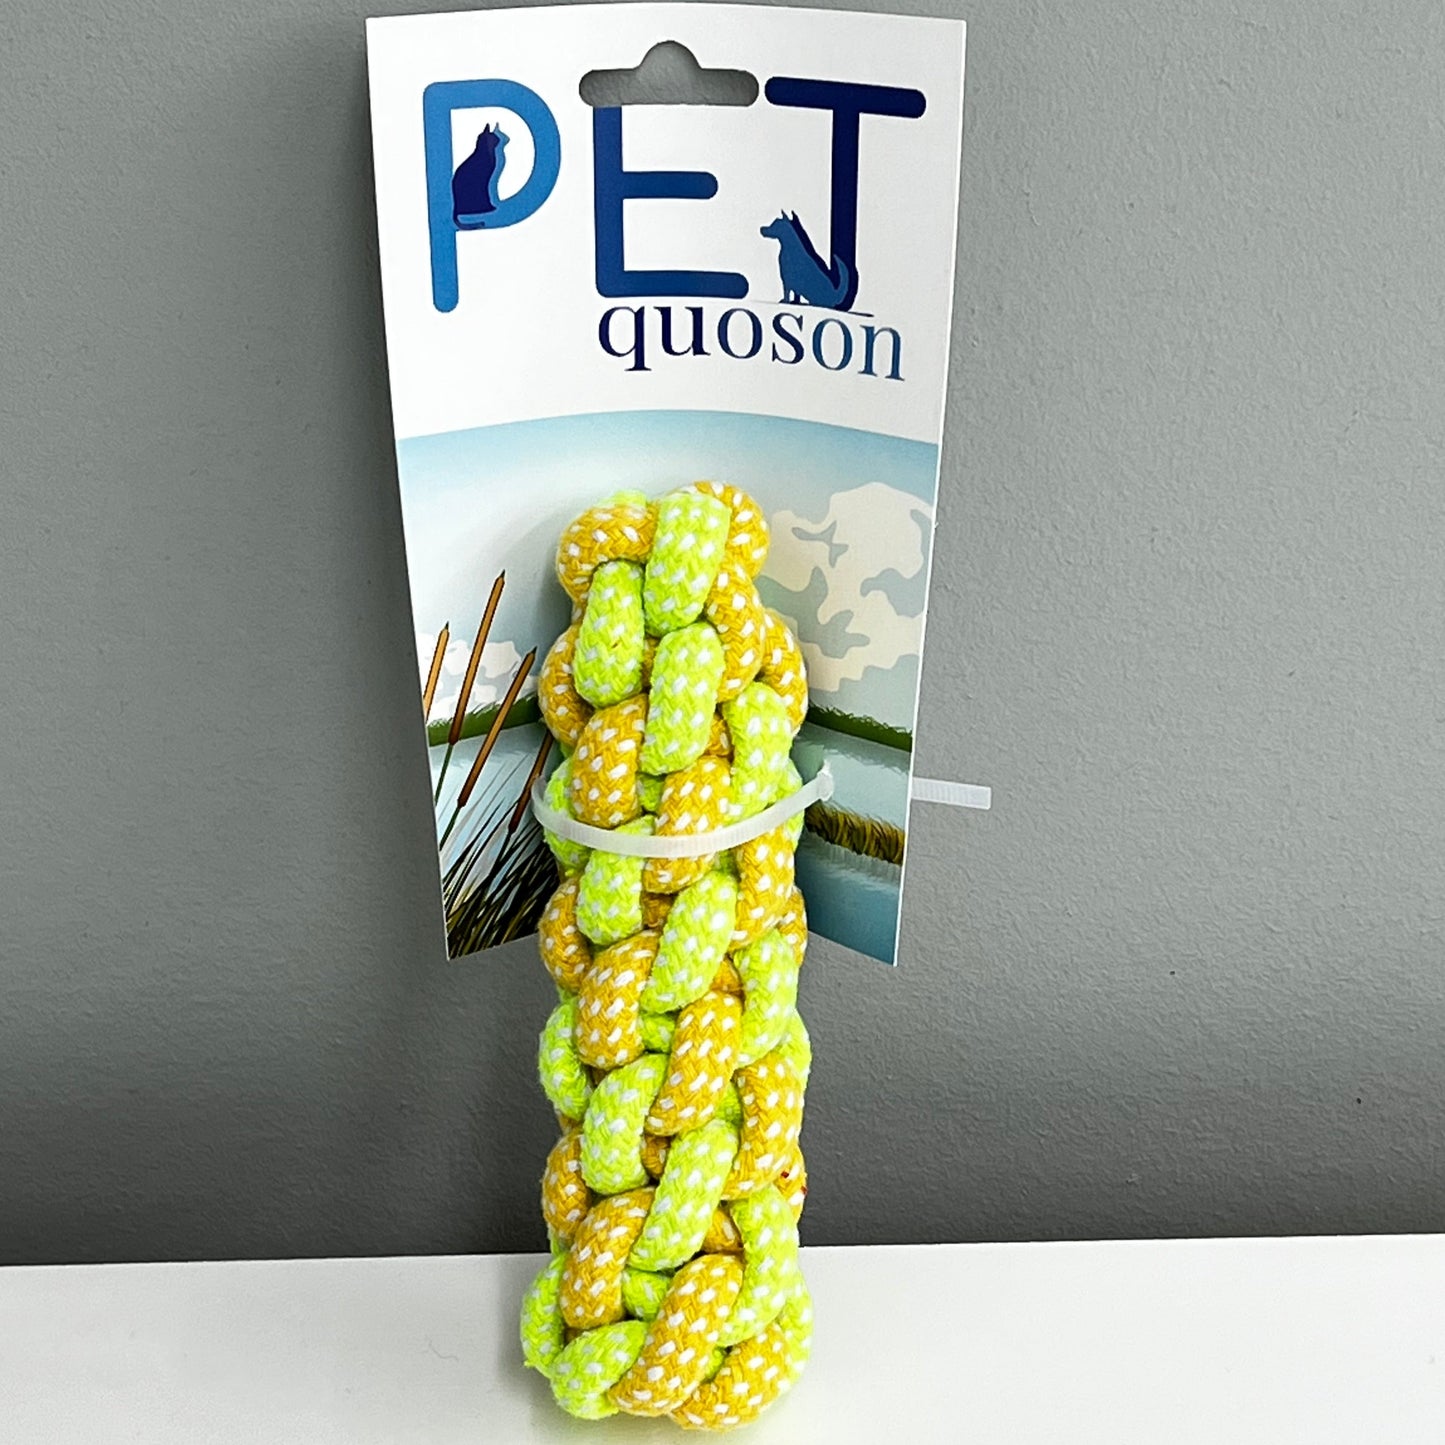 Green Rope Ball Toy